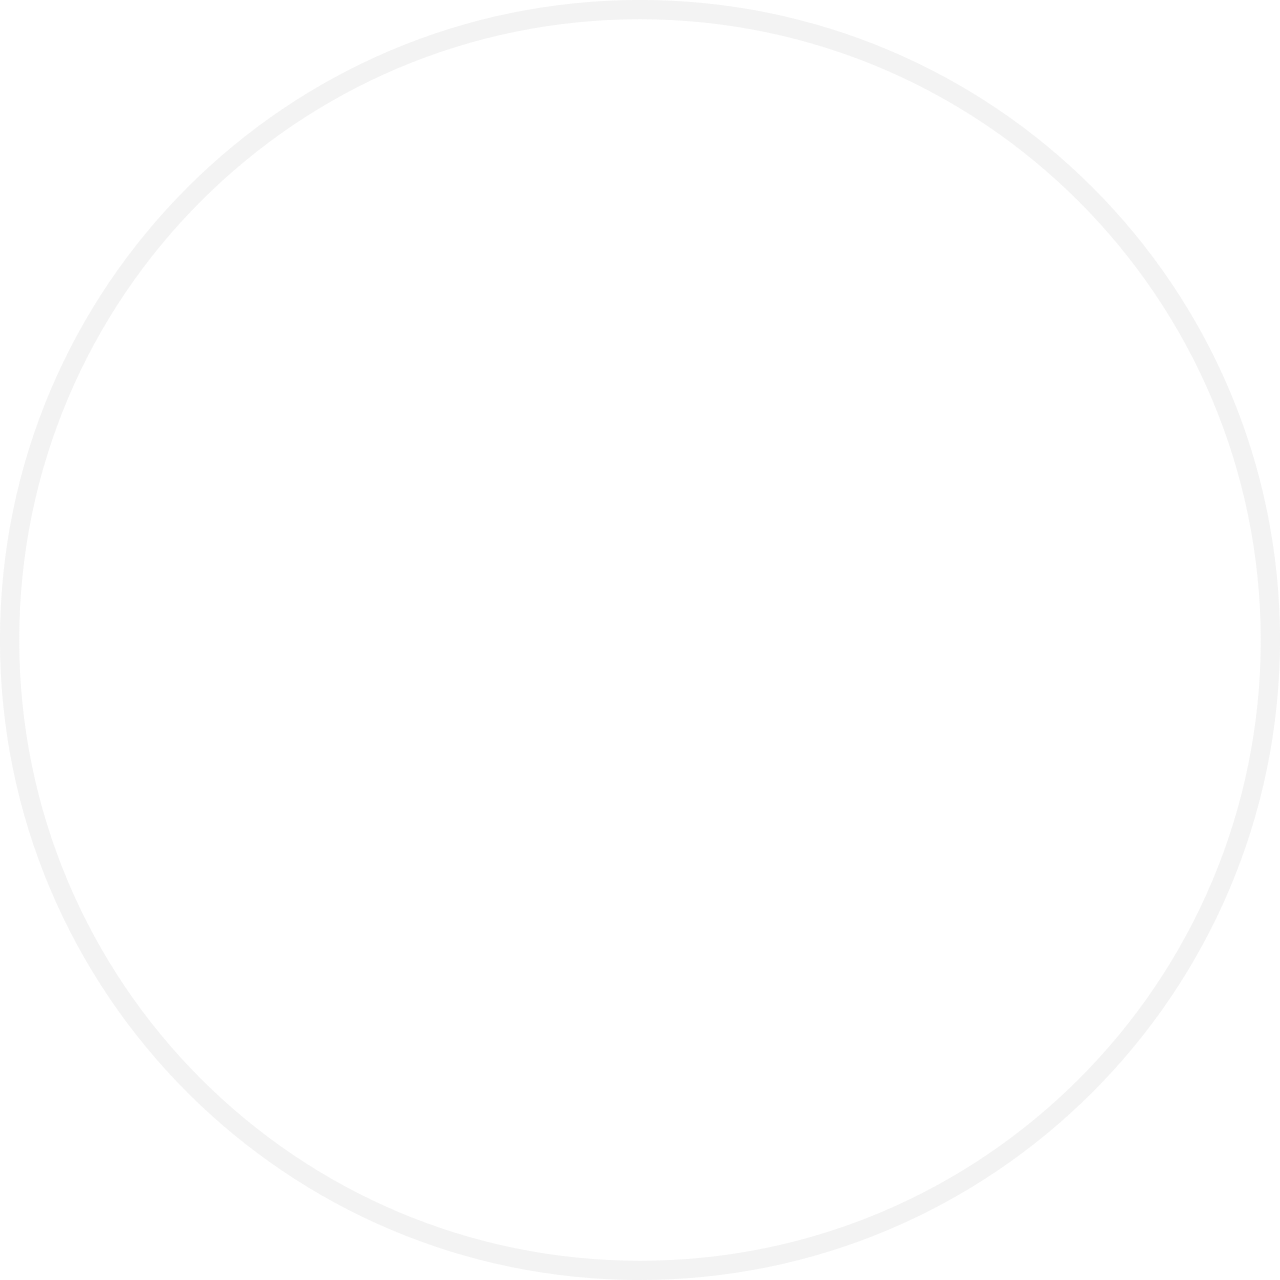 Drip & Drop Eatery's web page